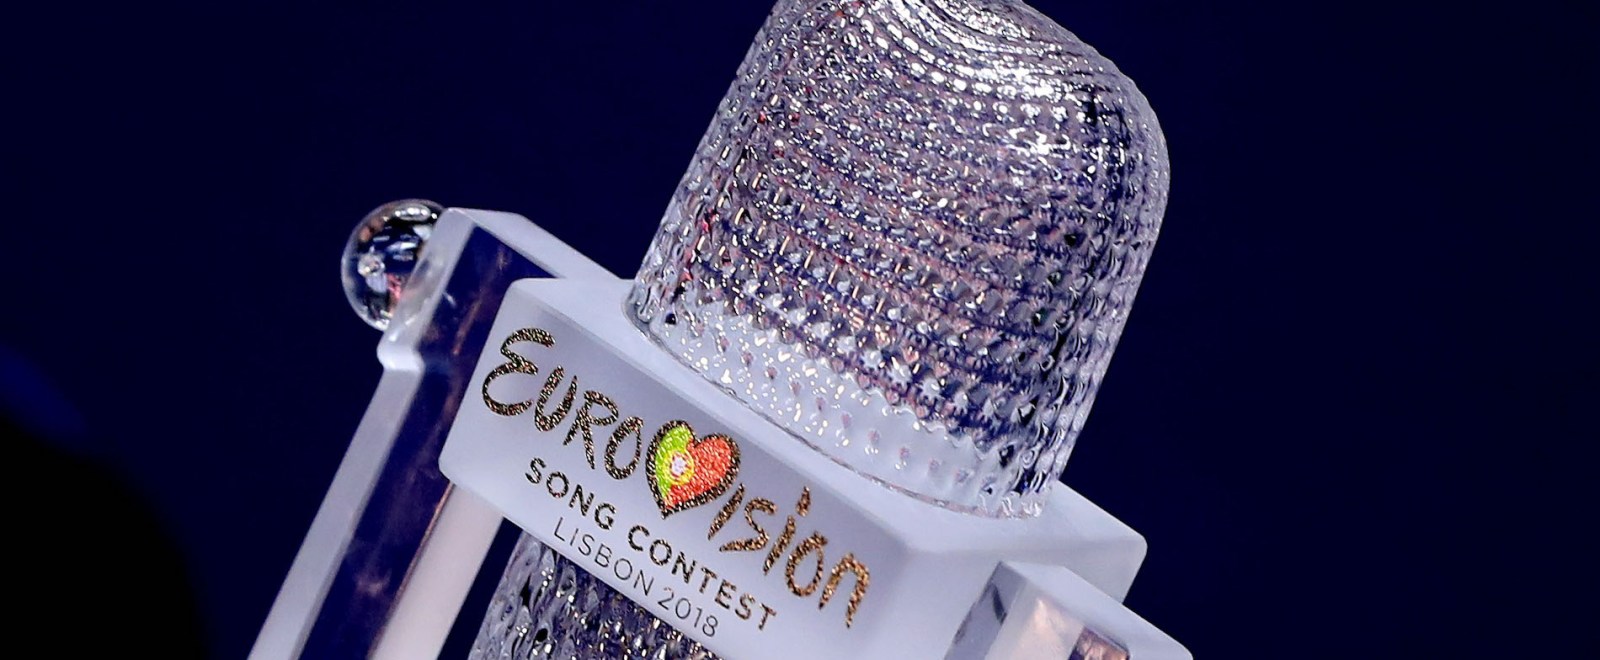 Eurovision Song Contest 2018 Trophy